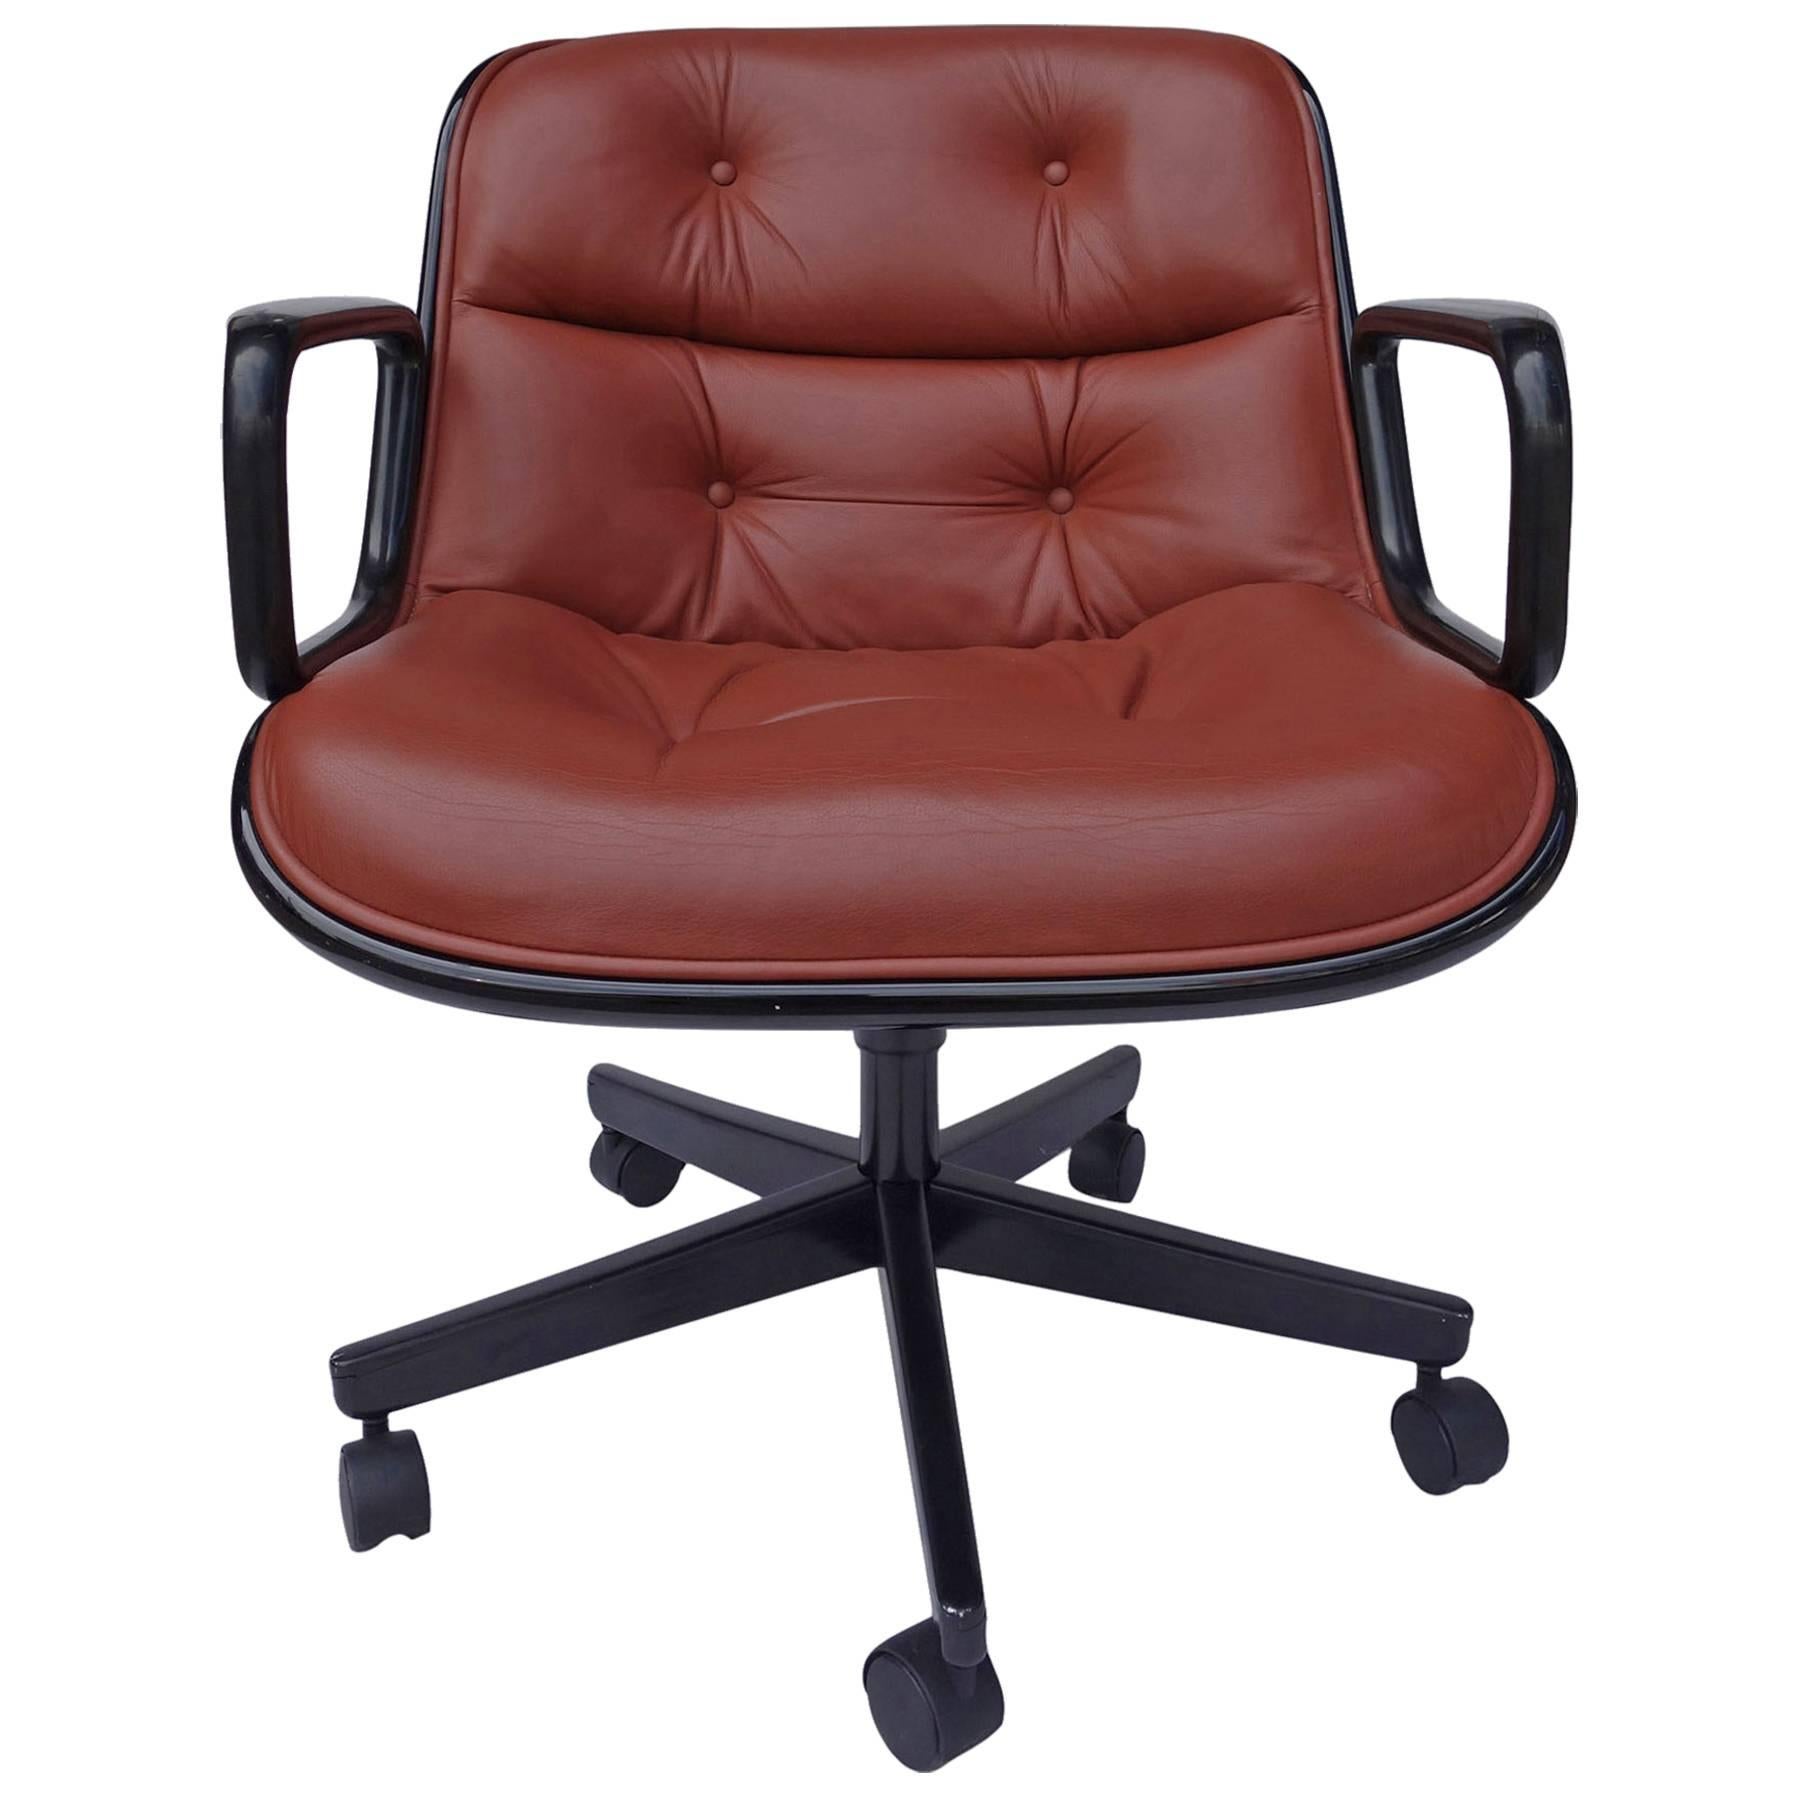 Executive Chair by Charles Pollock for Knoll